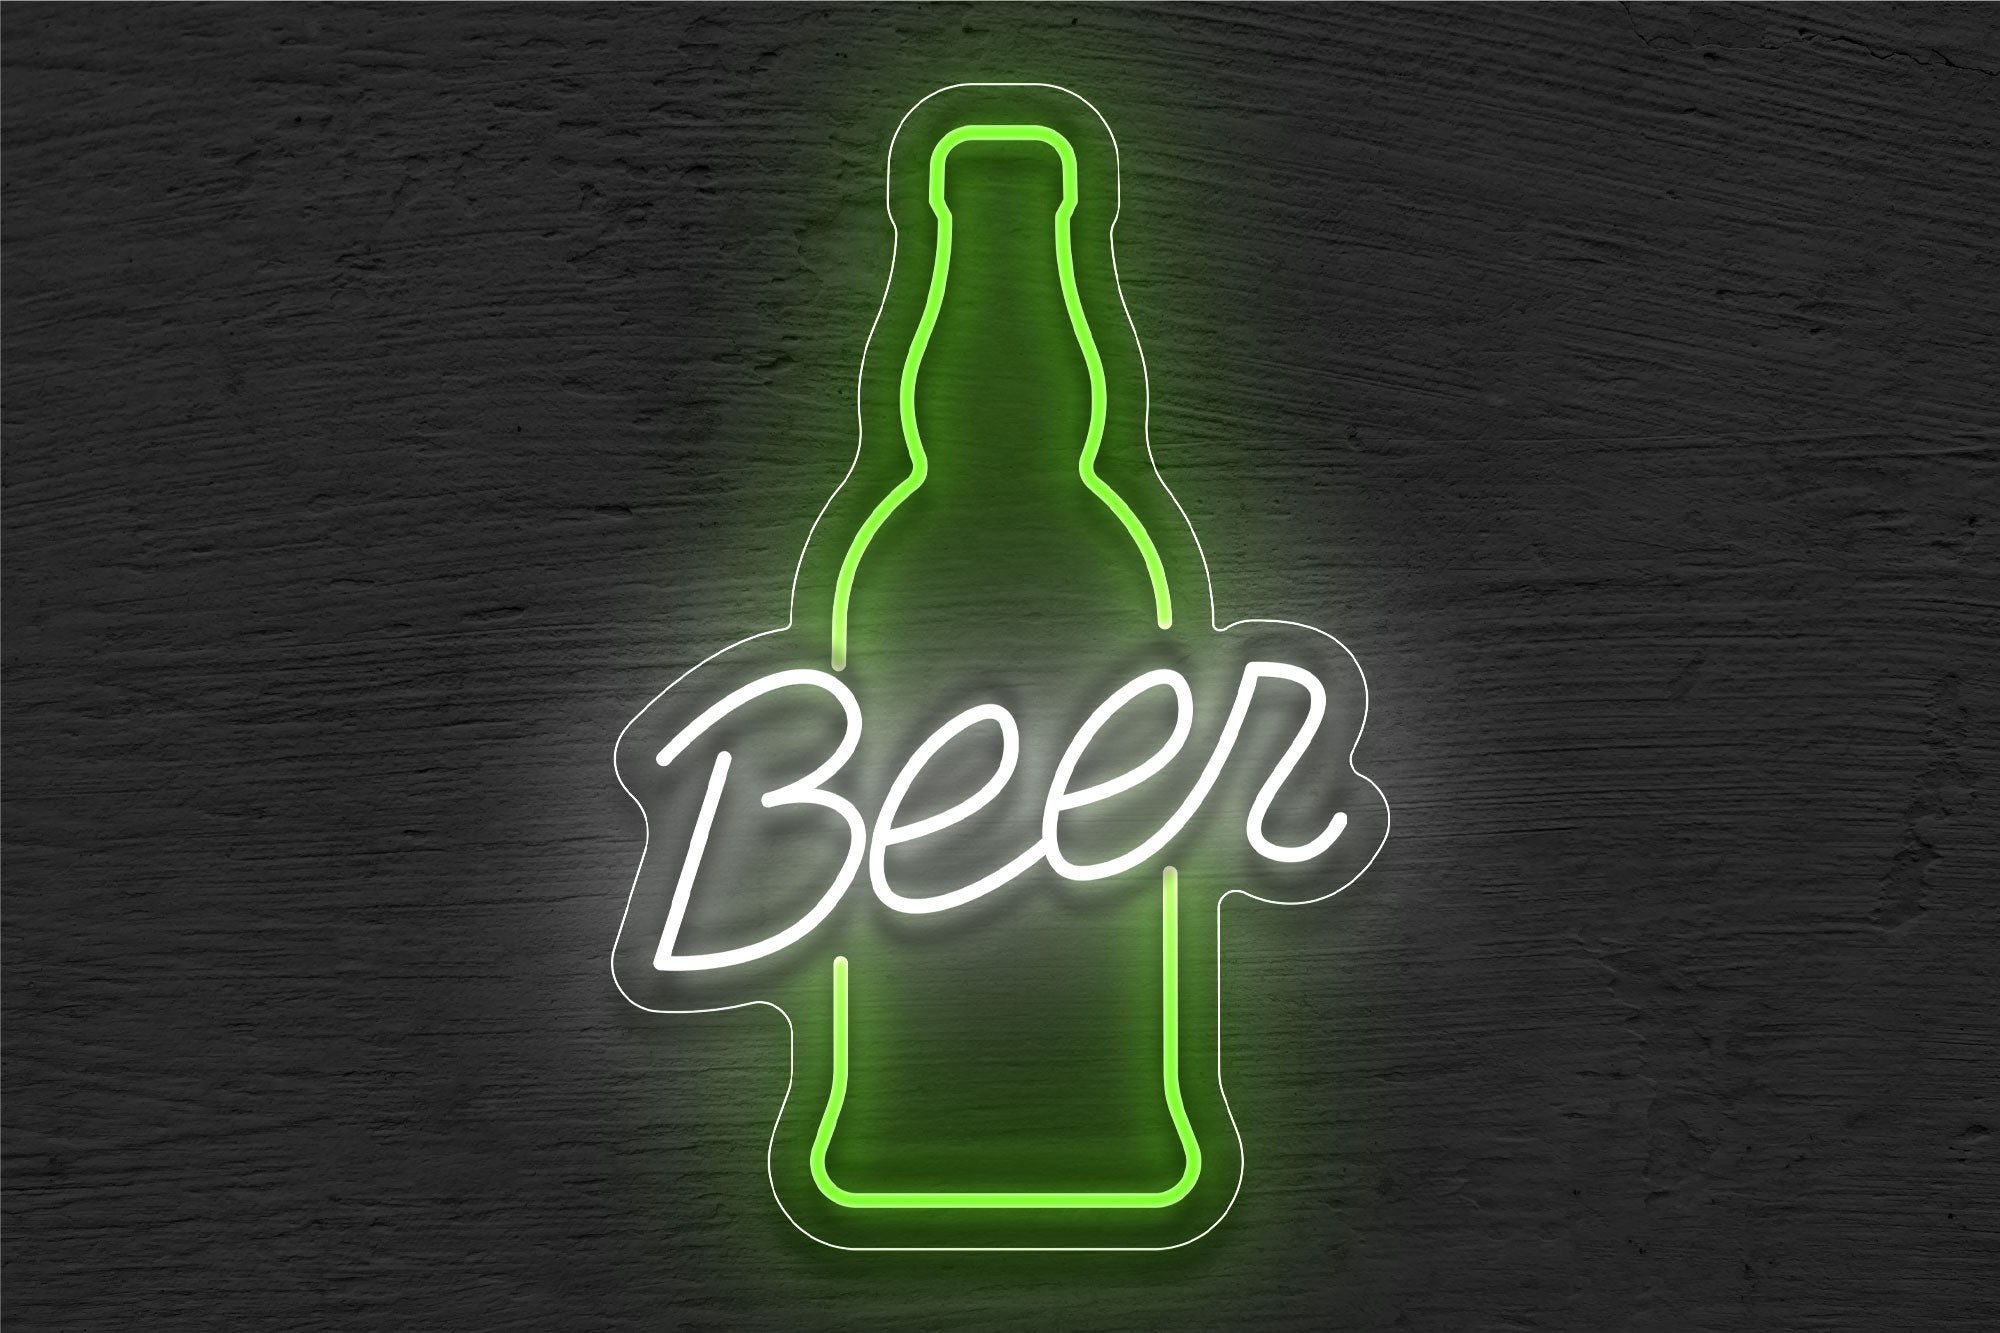 "Beer" with Bottle LED Neon Sign